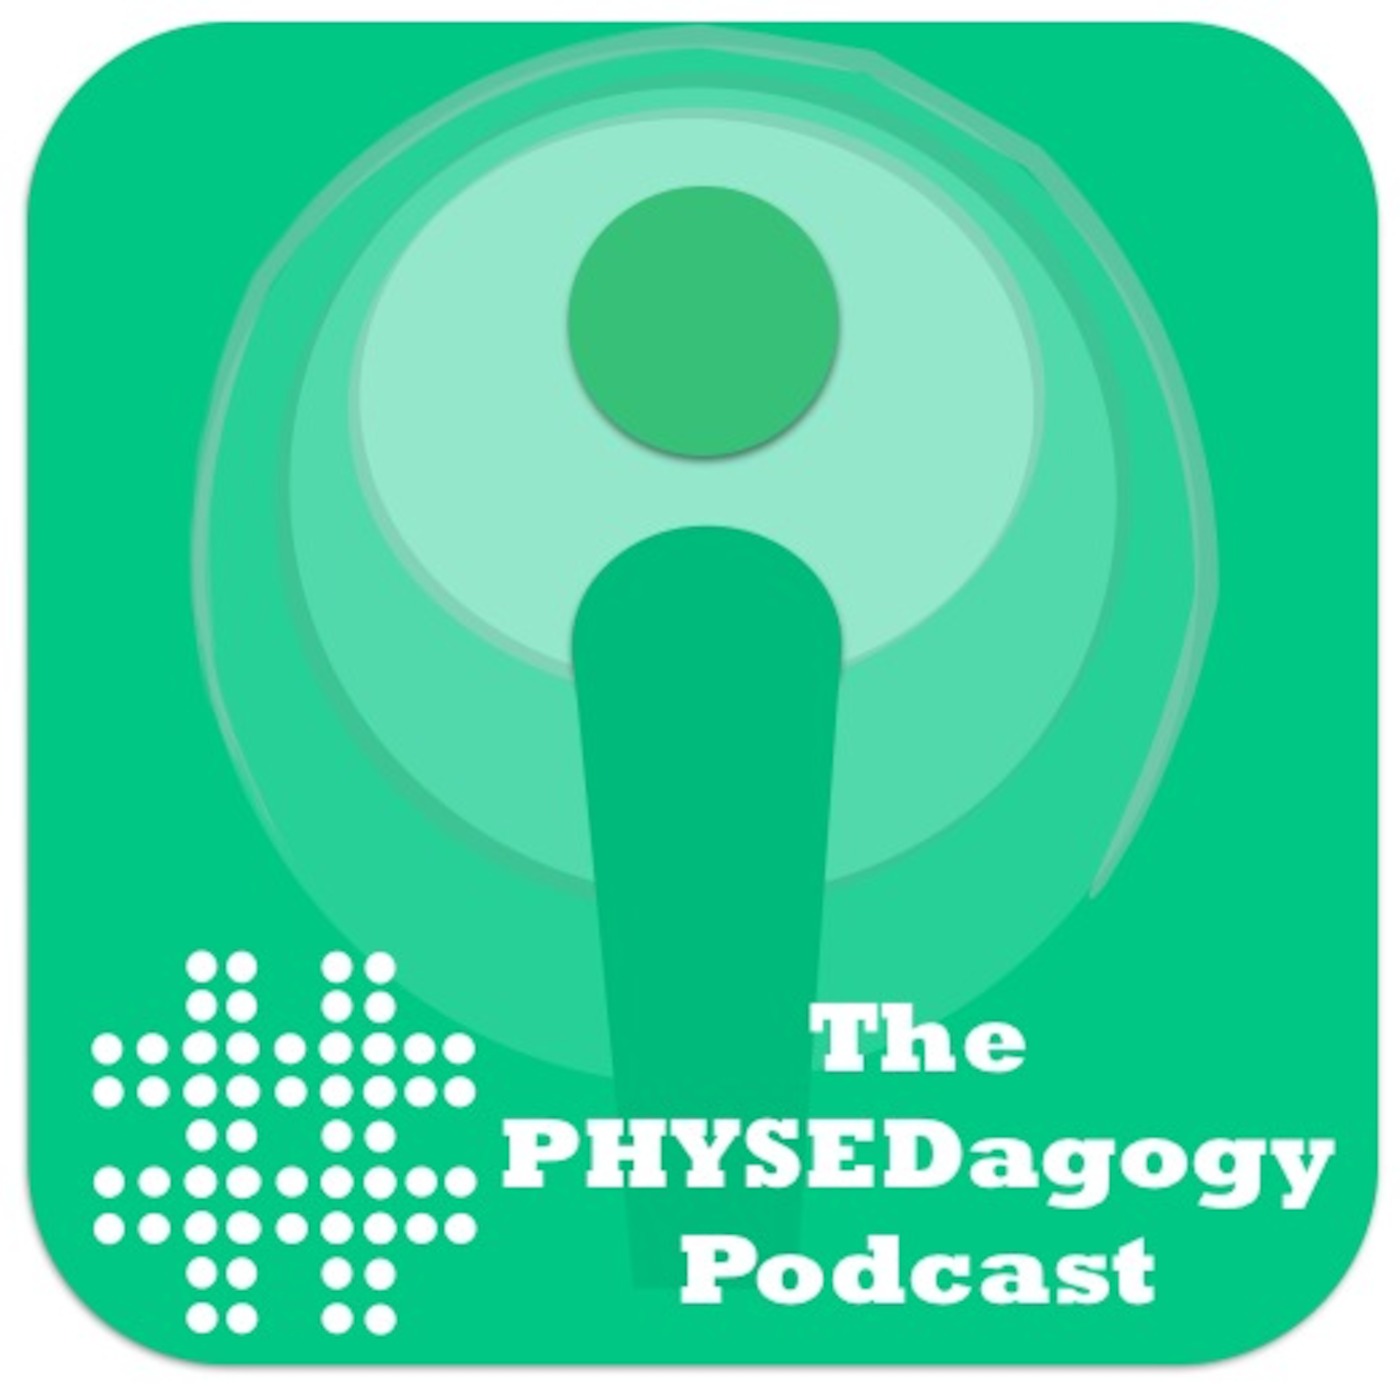 The Physedagogy Podcast - Professional Development for Physical Education Best Practices